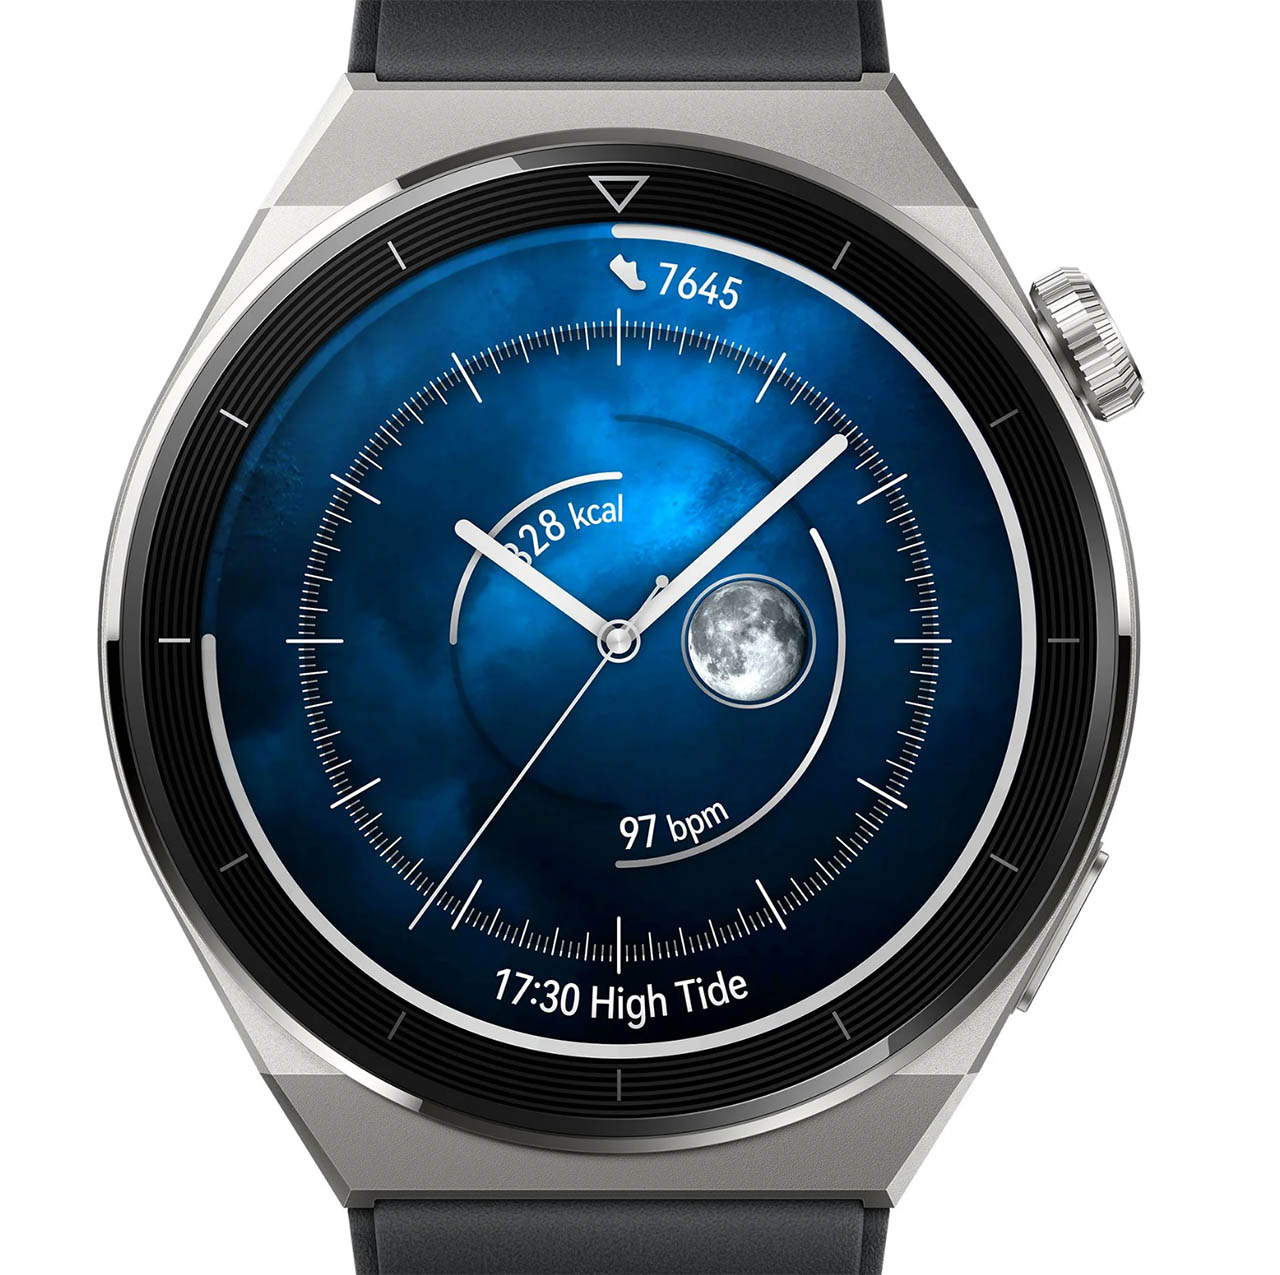 Huawei Watch GT 4: Successor to Watch GT 3 series on the horizon -   News